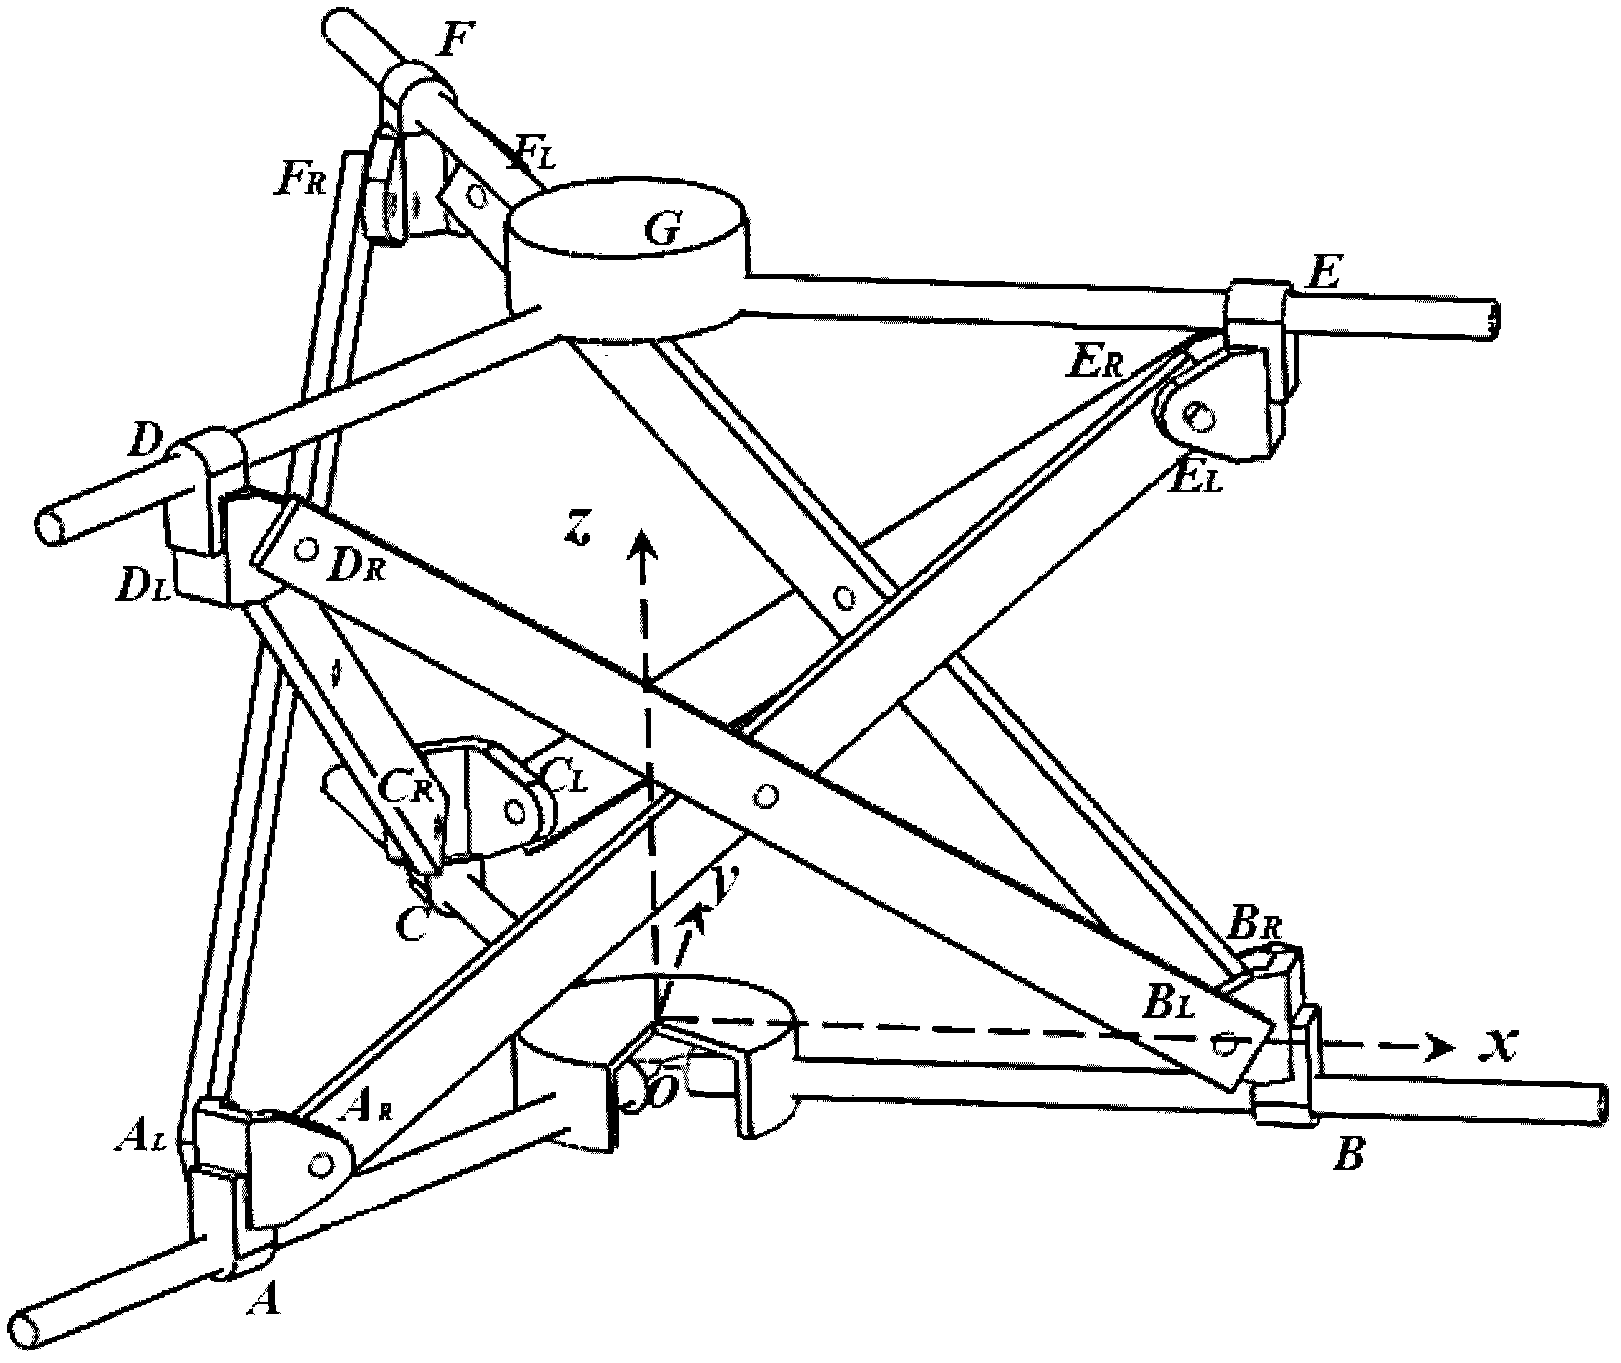 Three-face over-constrained scissor-type lifting mechanism